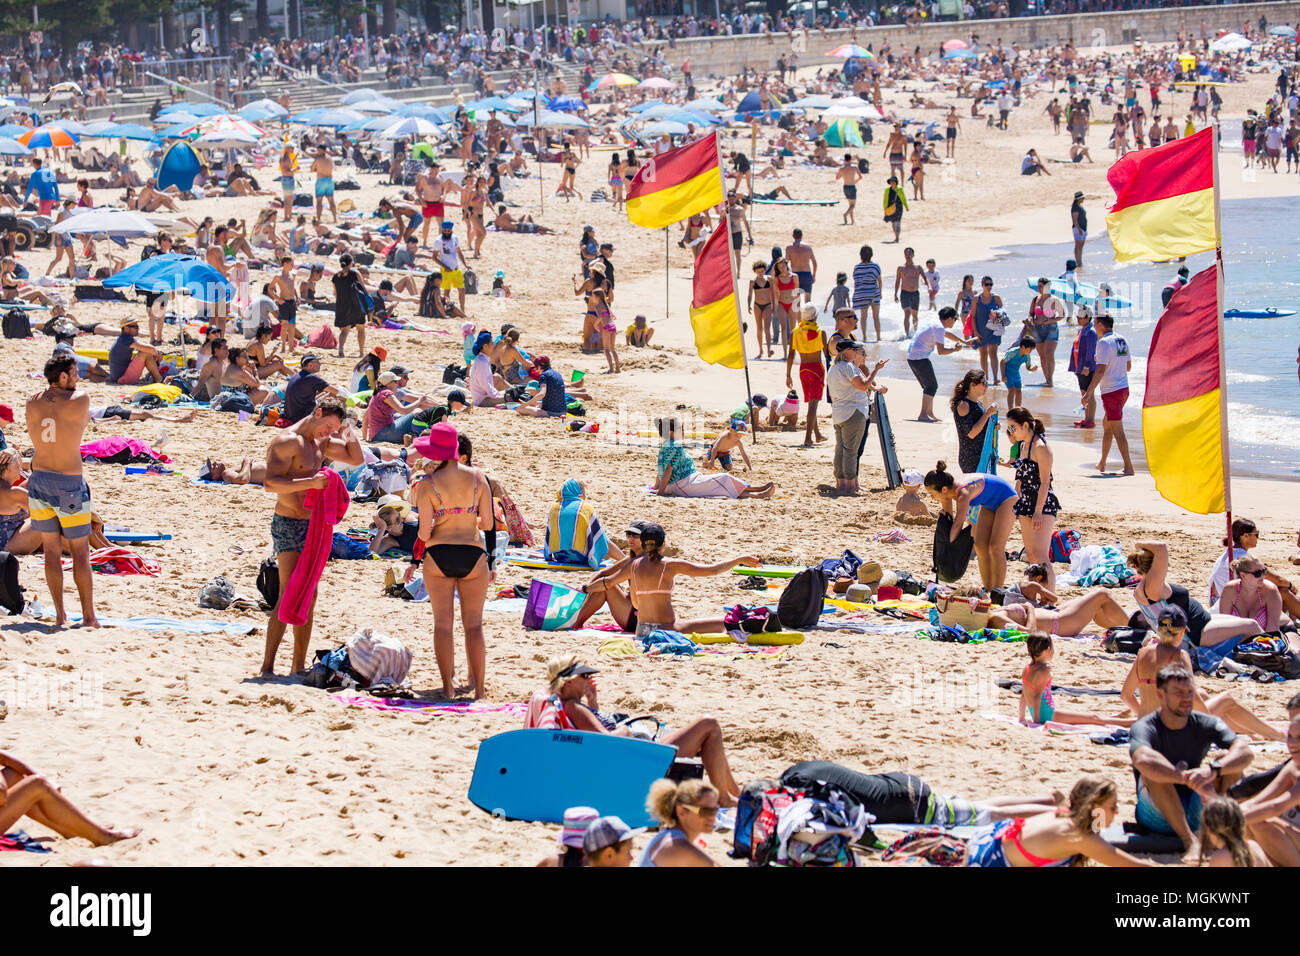 Crowded Manly Beach In Sydney On The Northern Beaches New South Wales